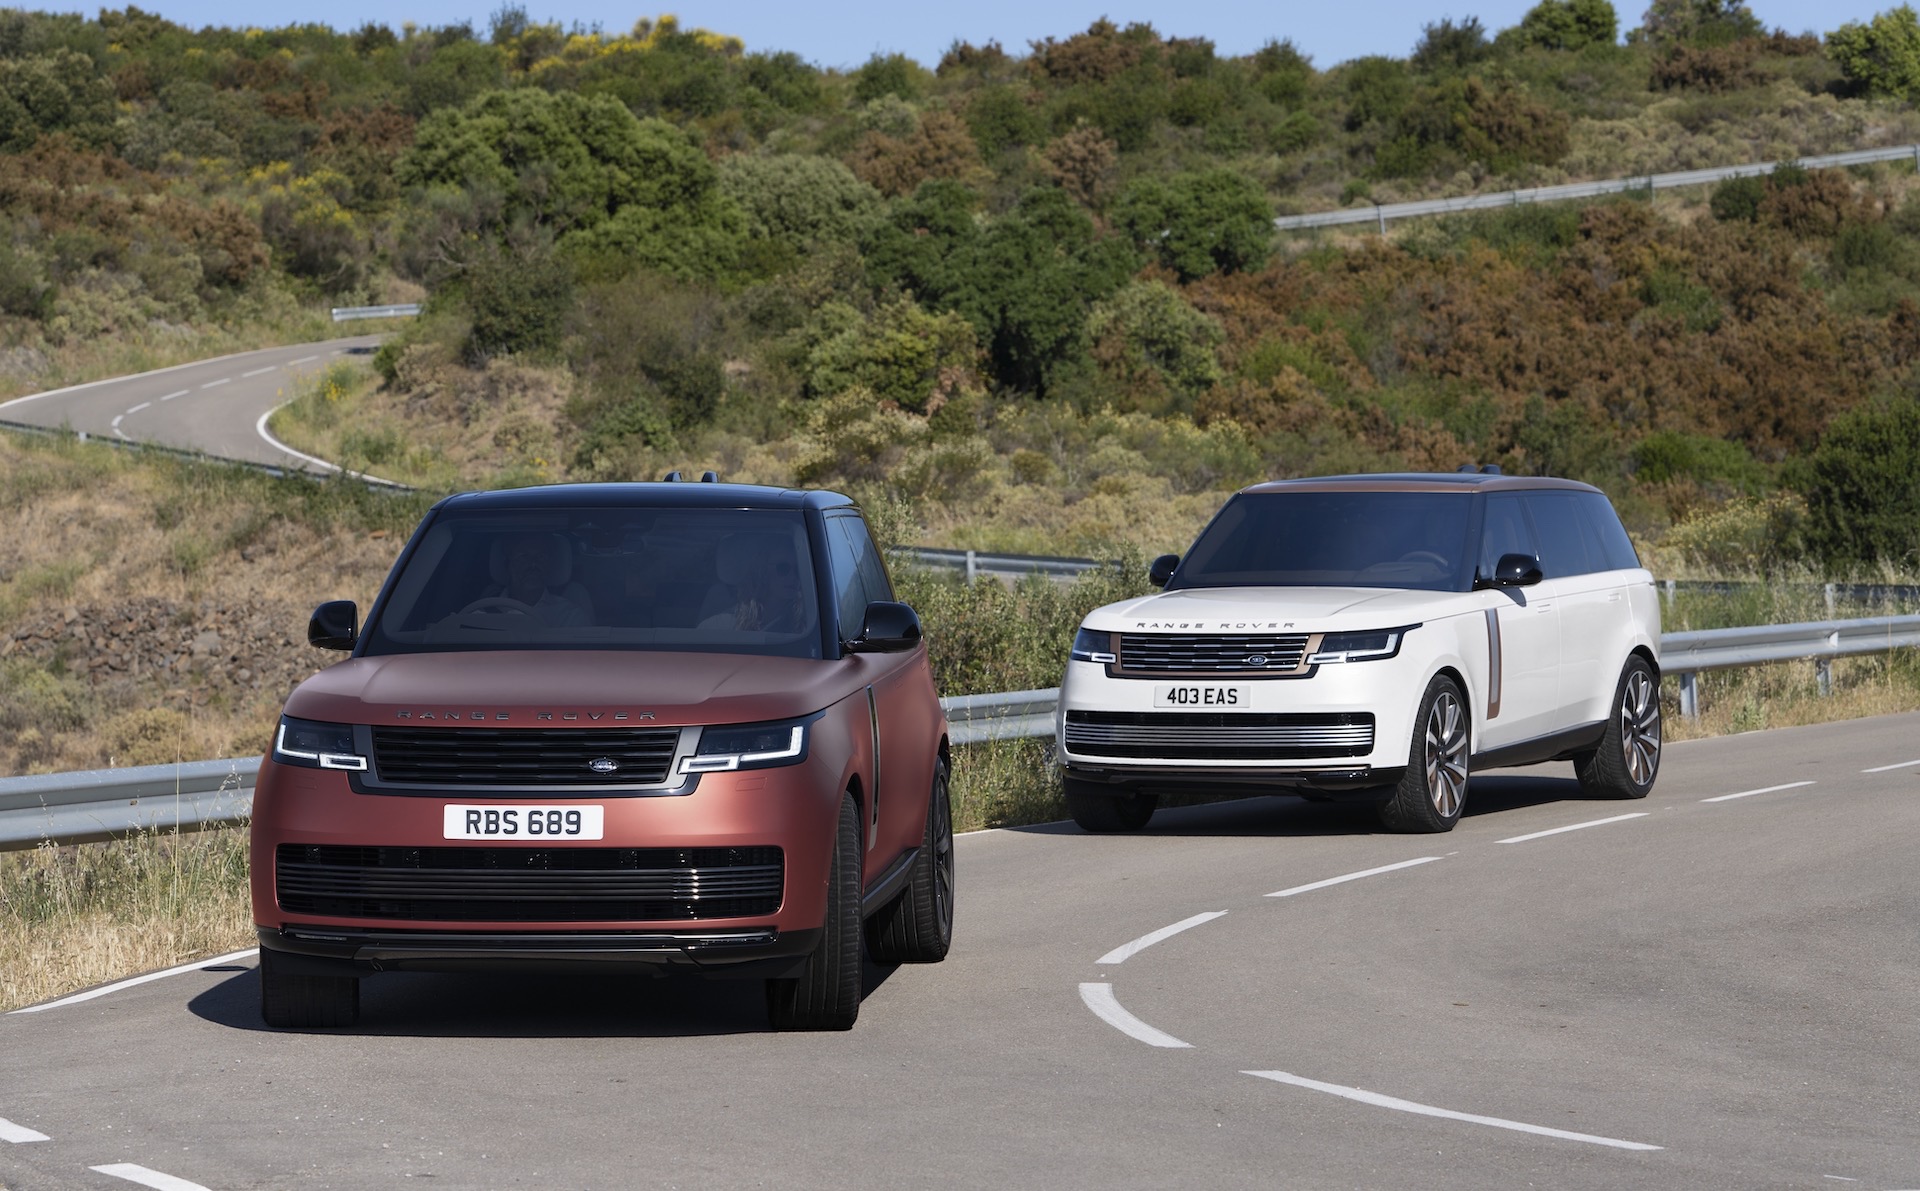 All-new Range Rover PHEV now on sale in Australia from $229,200